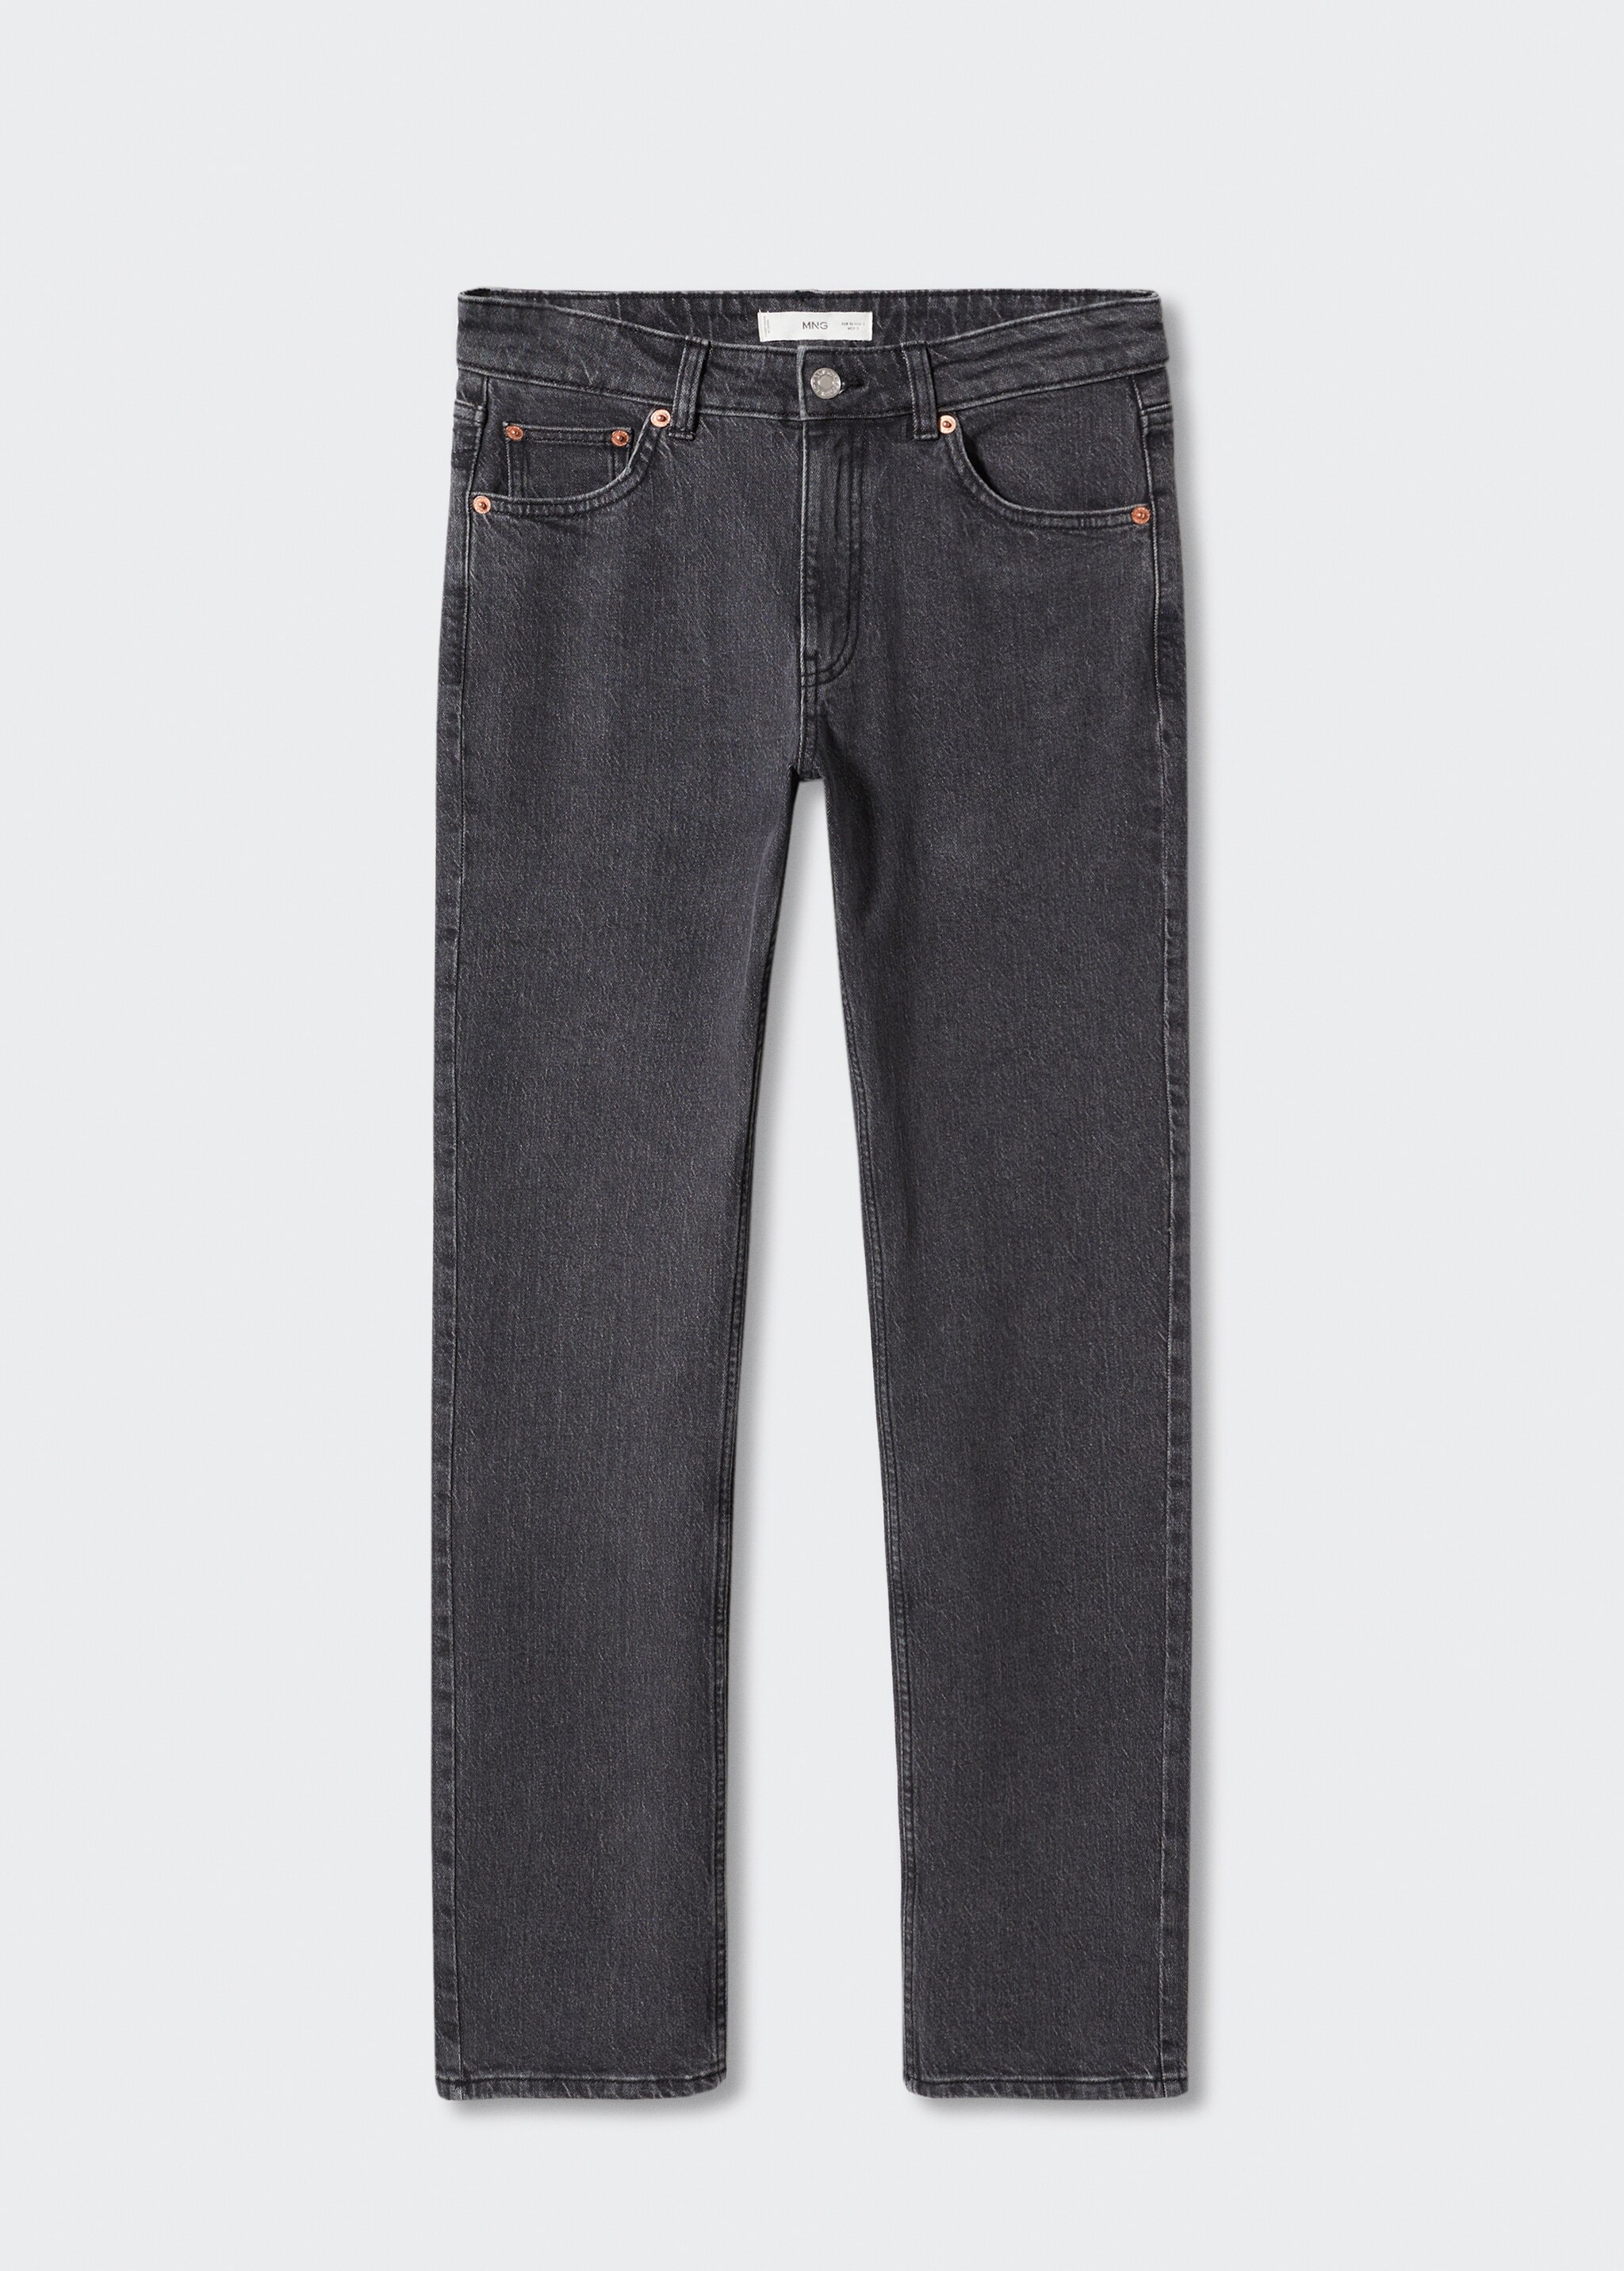 Medium-comfort straight jeans - Article without model